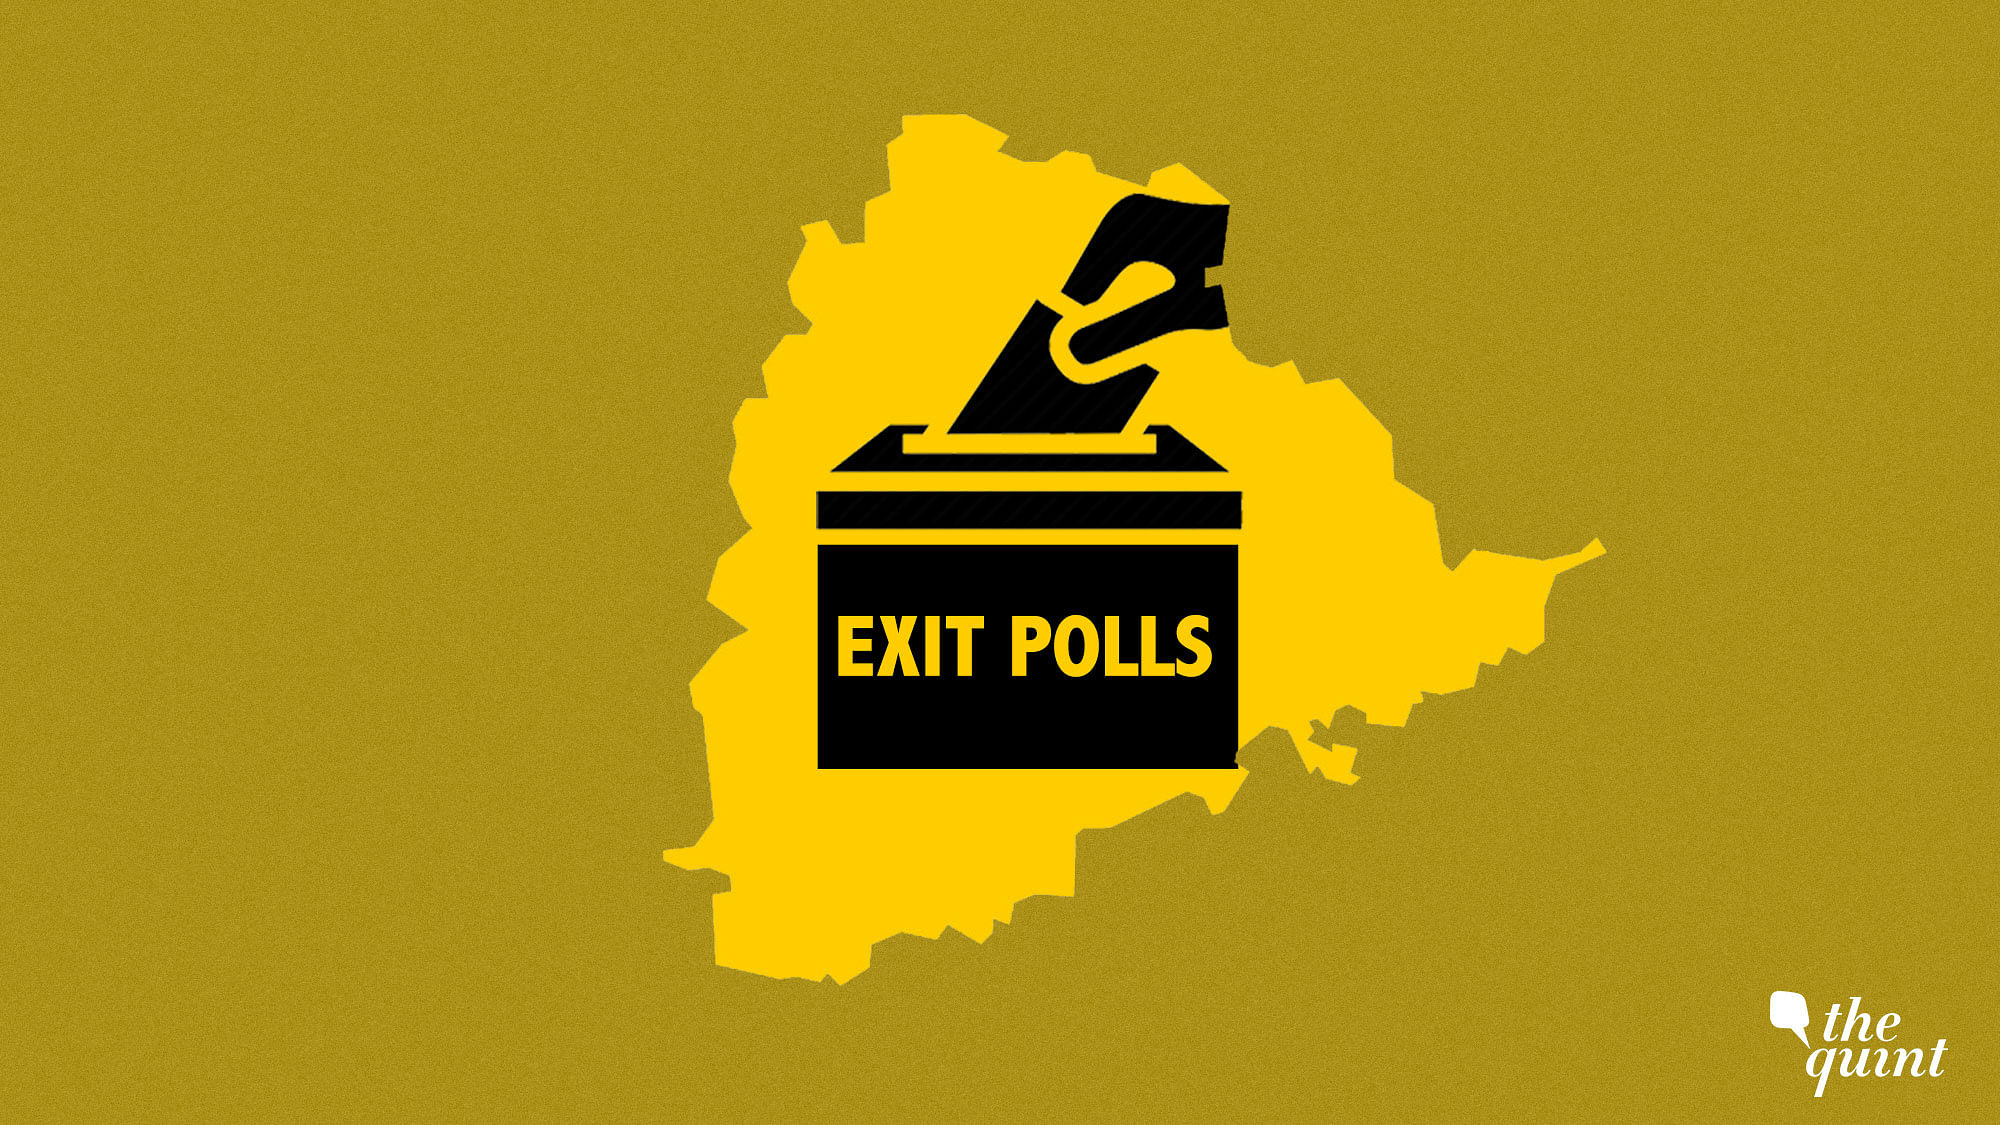 Stay tuned with The Quint from 6 pm on 7 December, as we break down the exit-poll numbers for you.